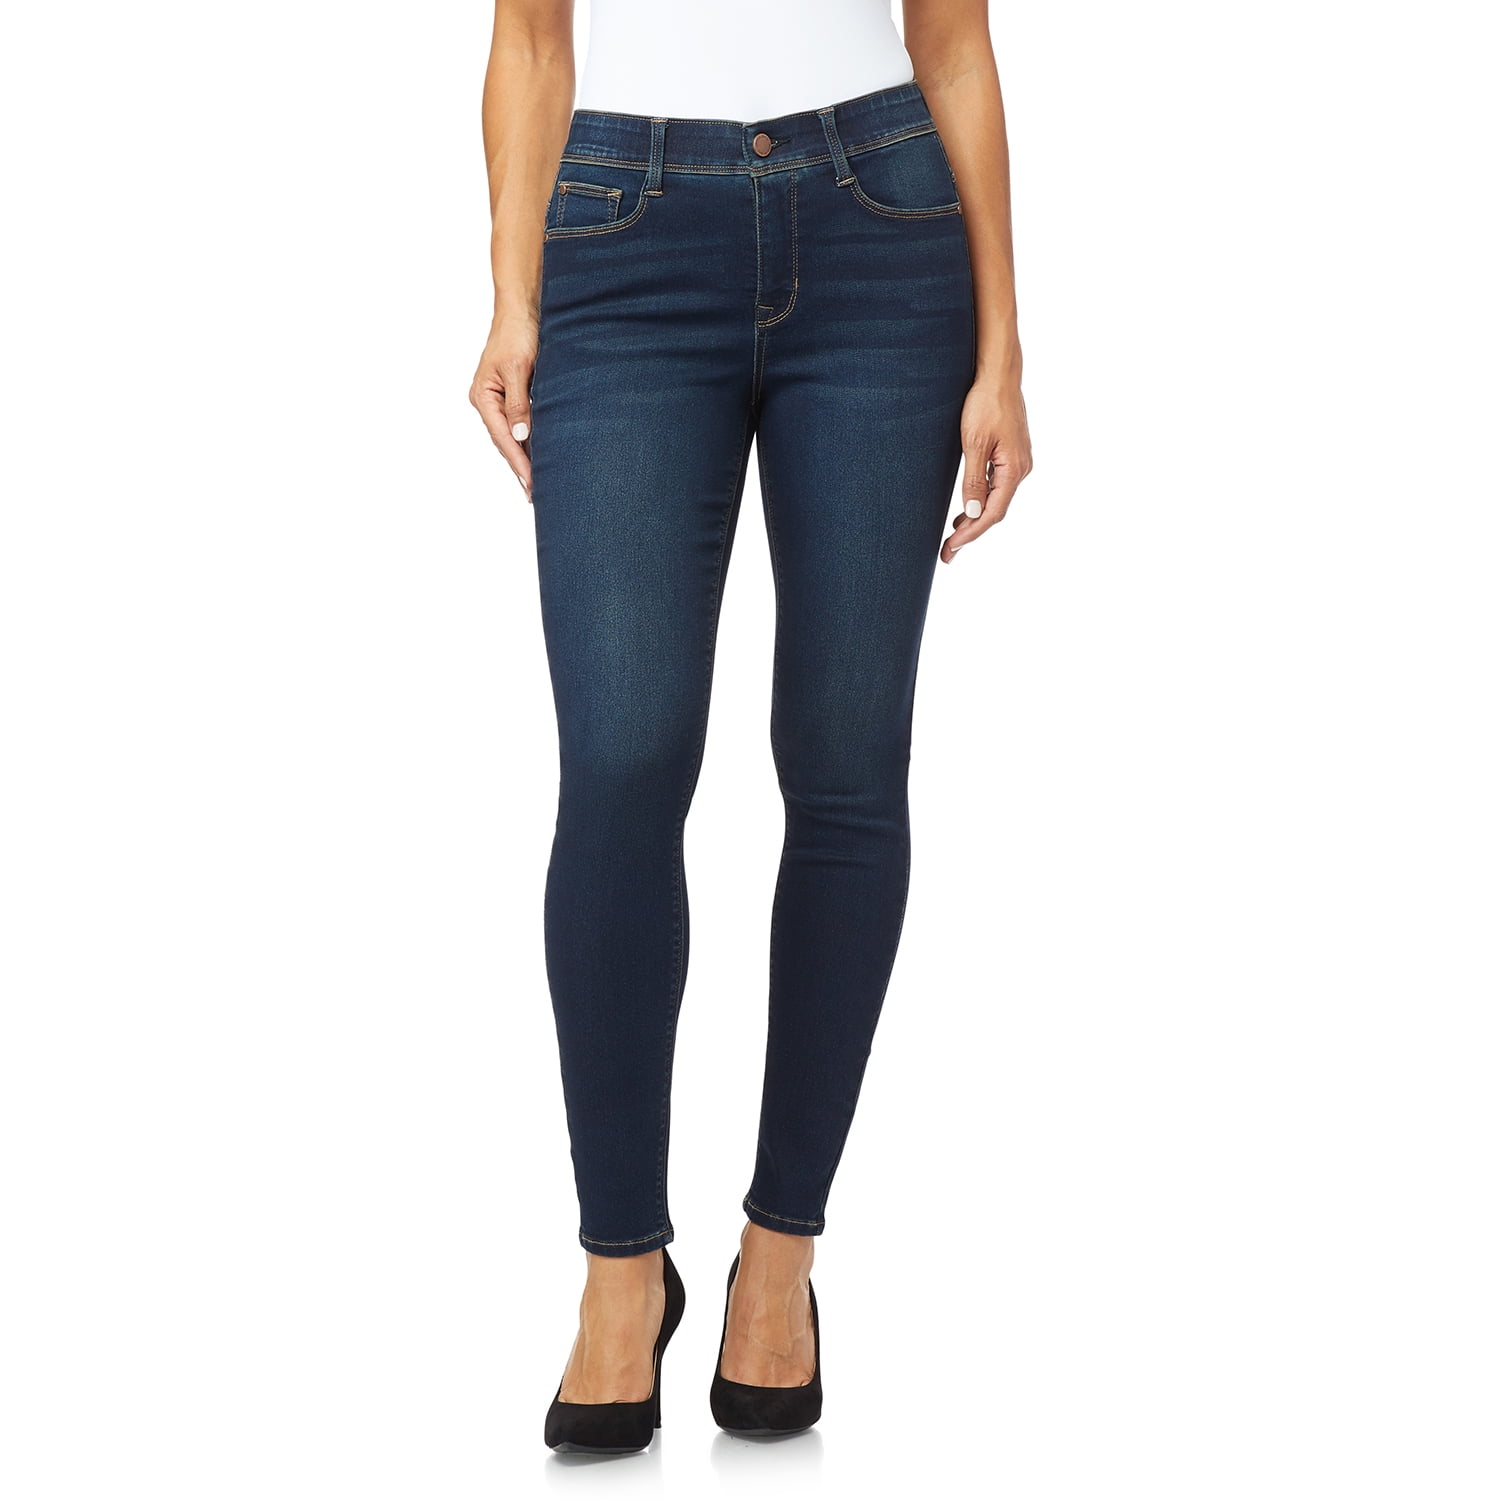 Angels Forever Young Women's 360 Sculpt Skinny Mid-Rise Jeans - Walmart.com